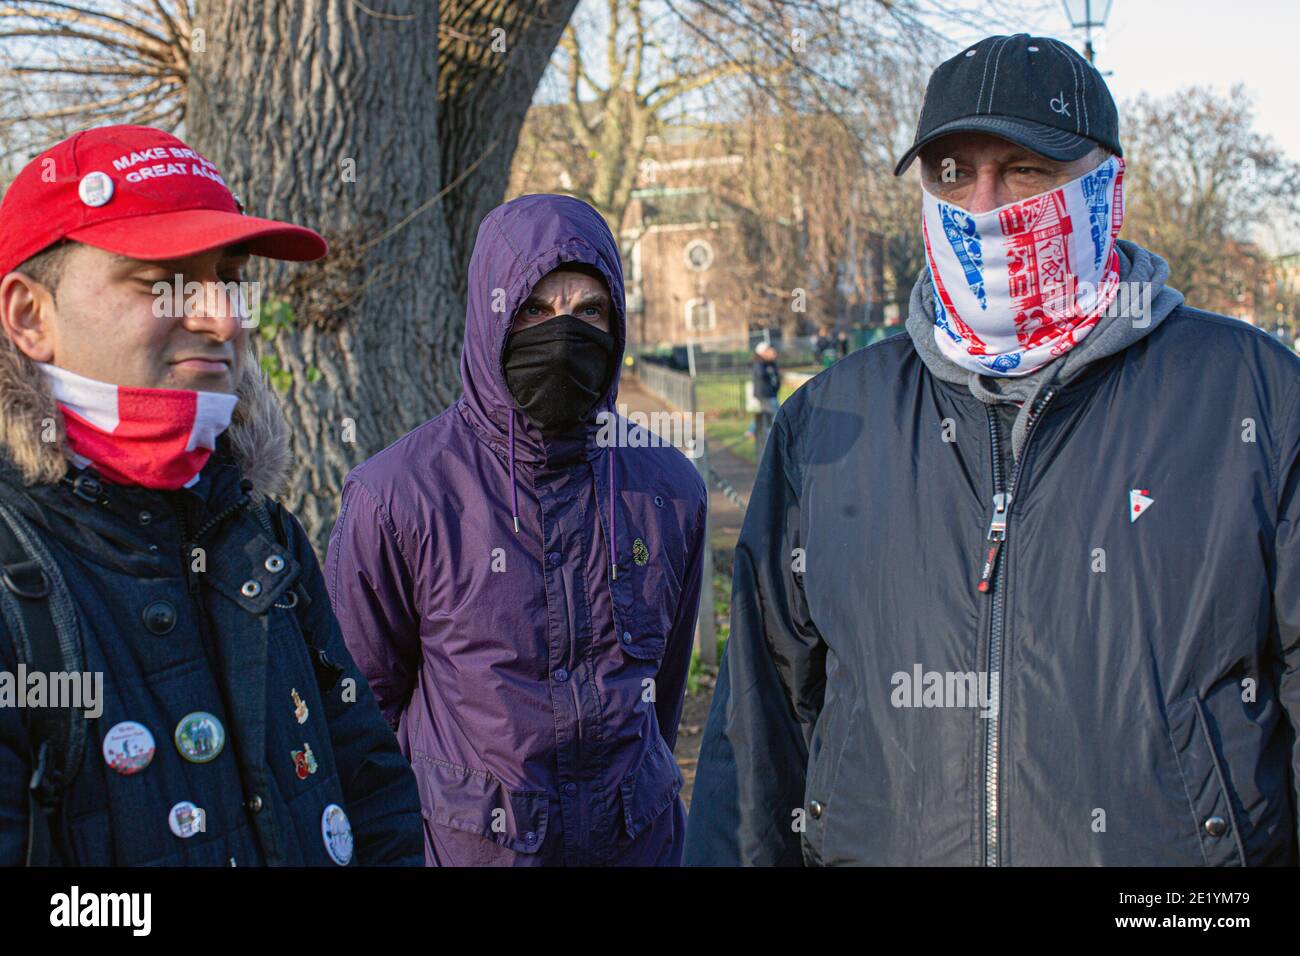 Stand Up Protestors at Clapham Common during the anti-lockdown demonstration on January 9, 2021 in London, England. Stock Photo